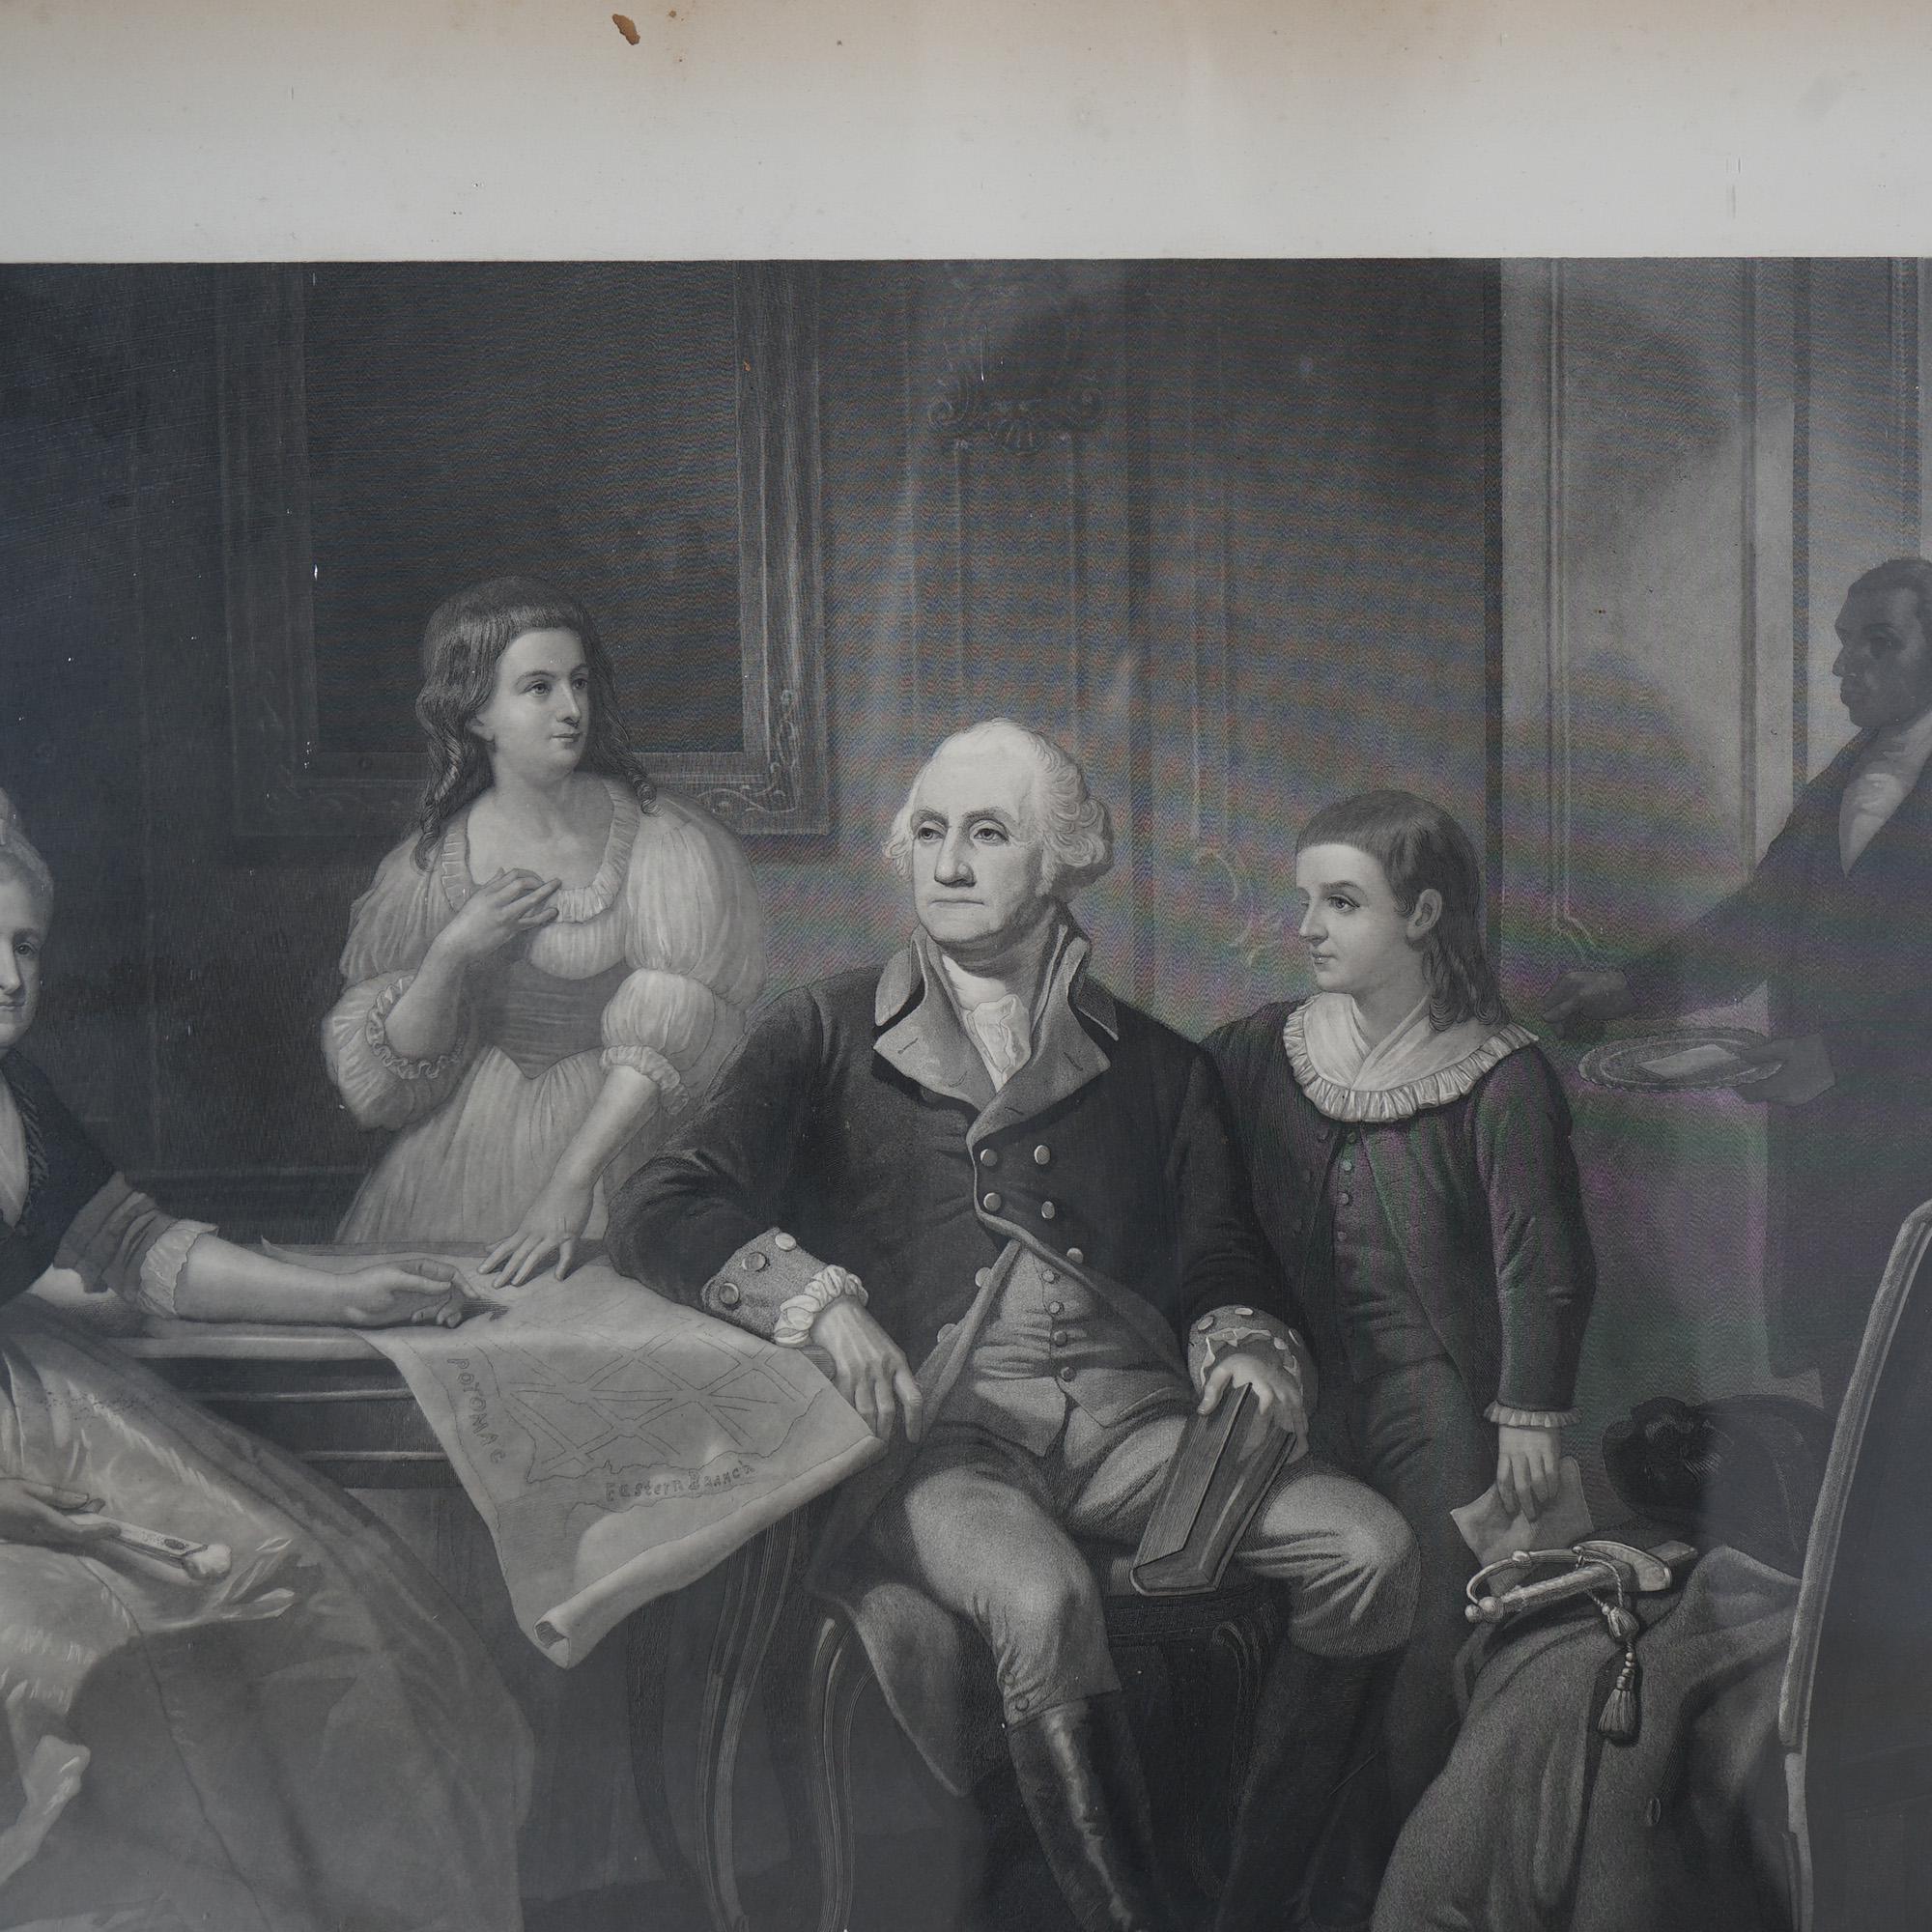  Antique Presidential Etching “Washington And His Family” Proof, Engraved by Wm. Sartain Philad., Proof Printed by Irwin & Sartain Philad., Framed, c1864

AFTER, Christian Schussele (American, 1824 - 1879)
MAKER, William Sartain (American, 1843 -